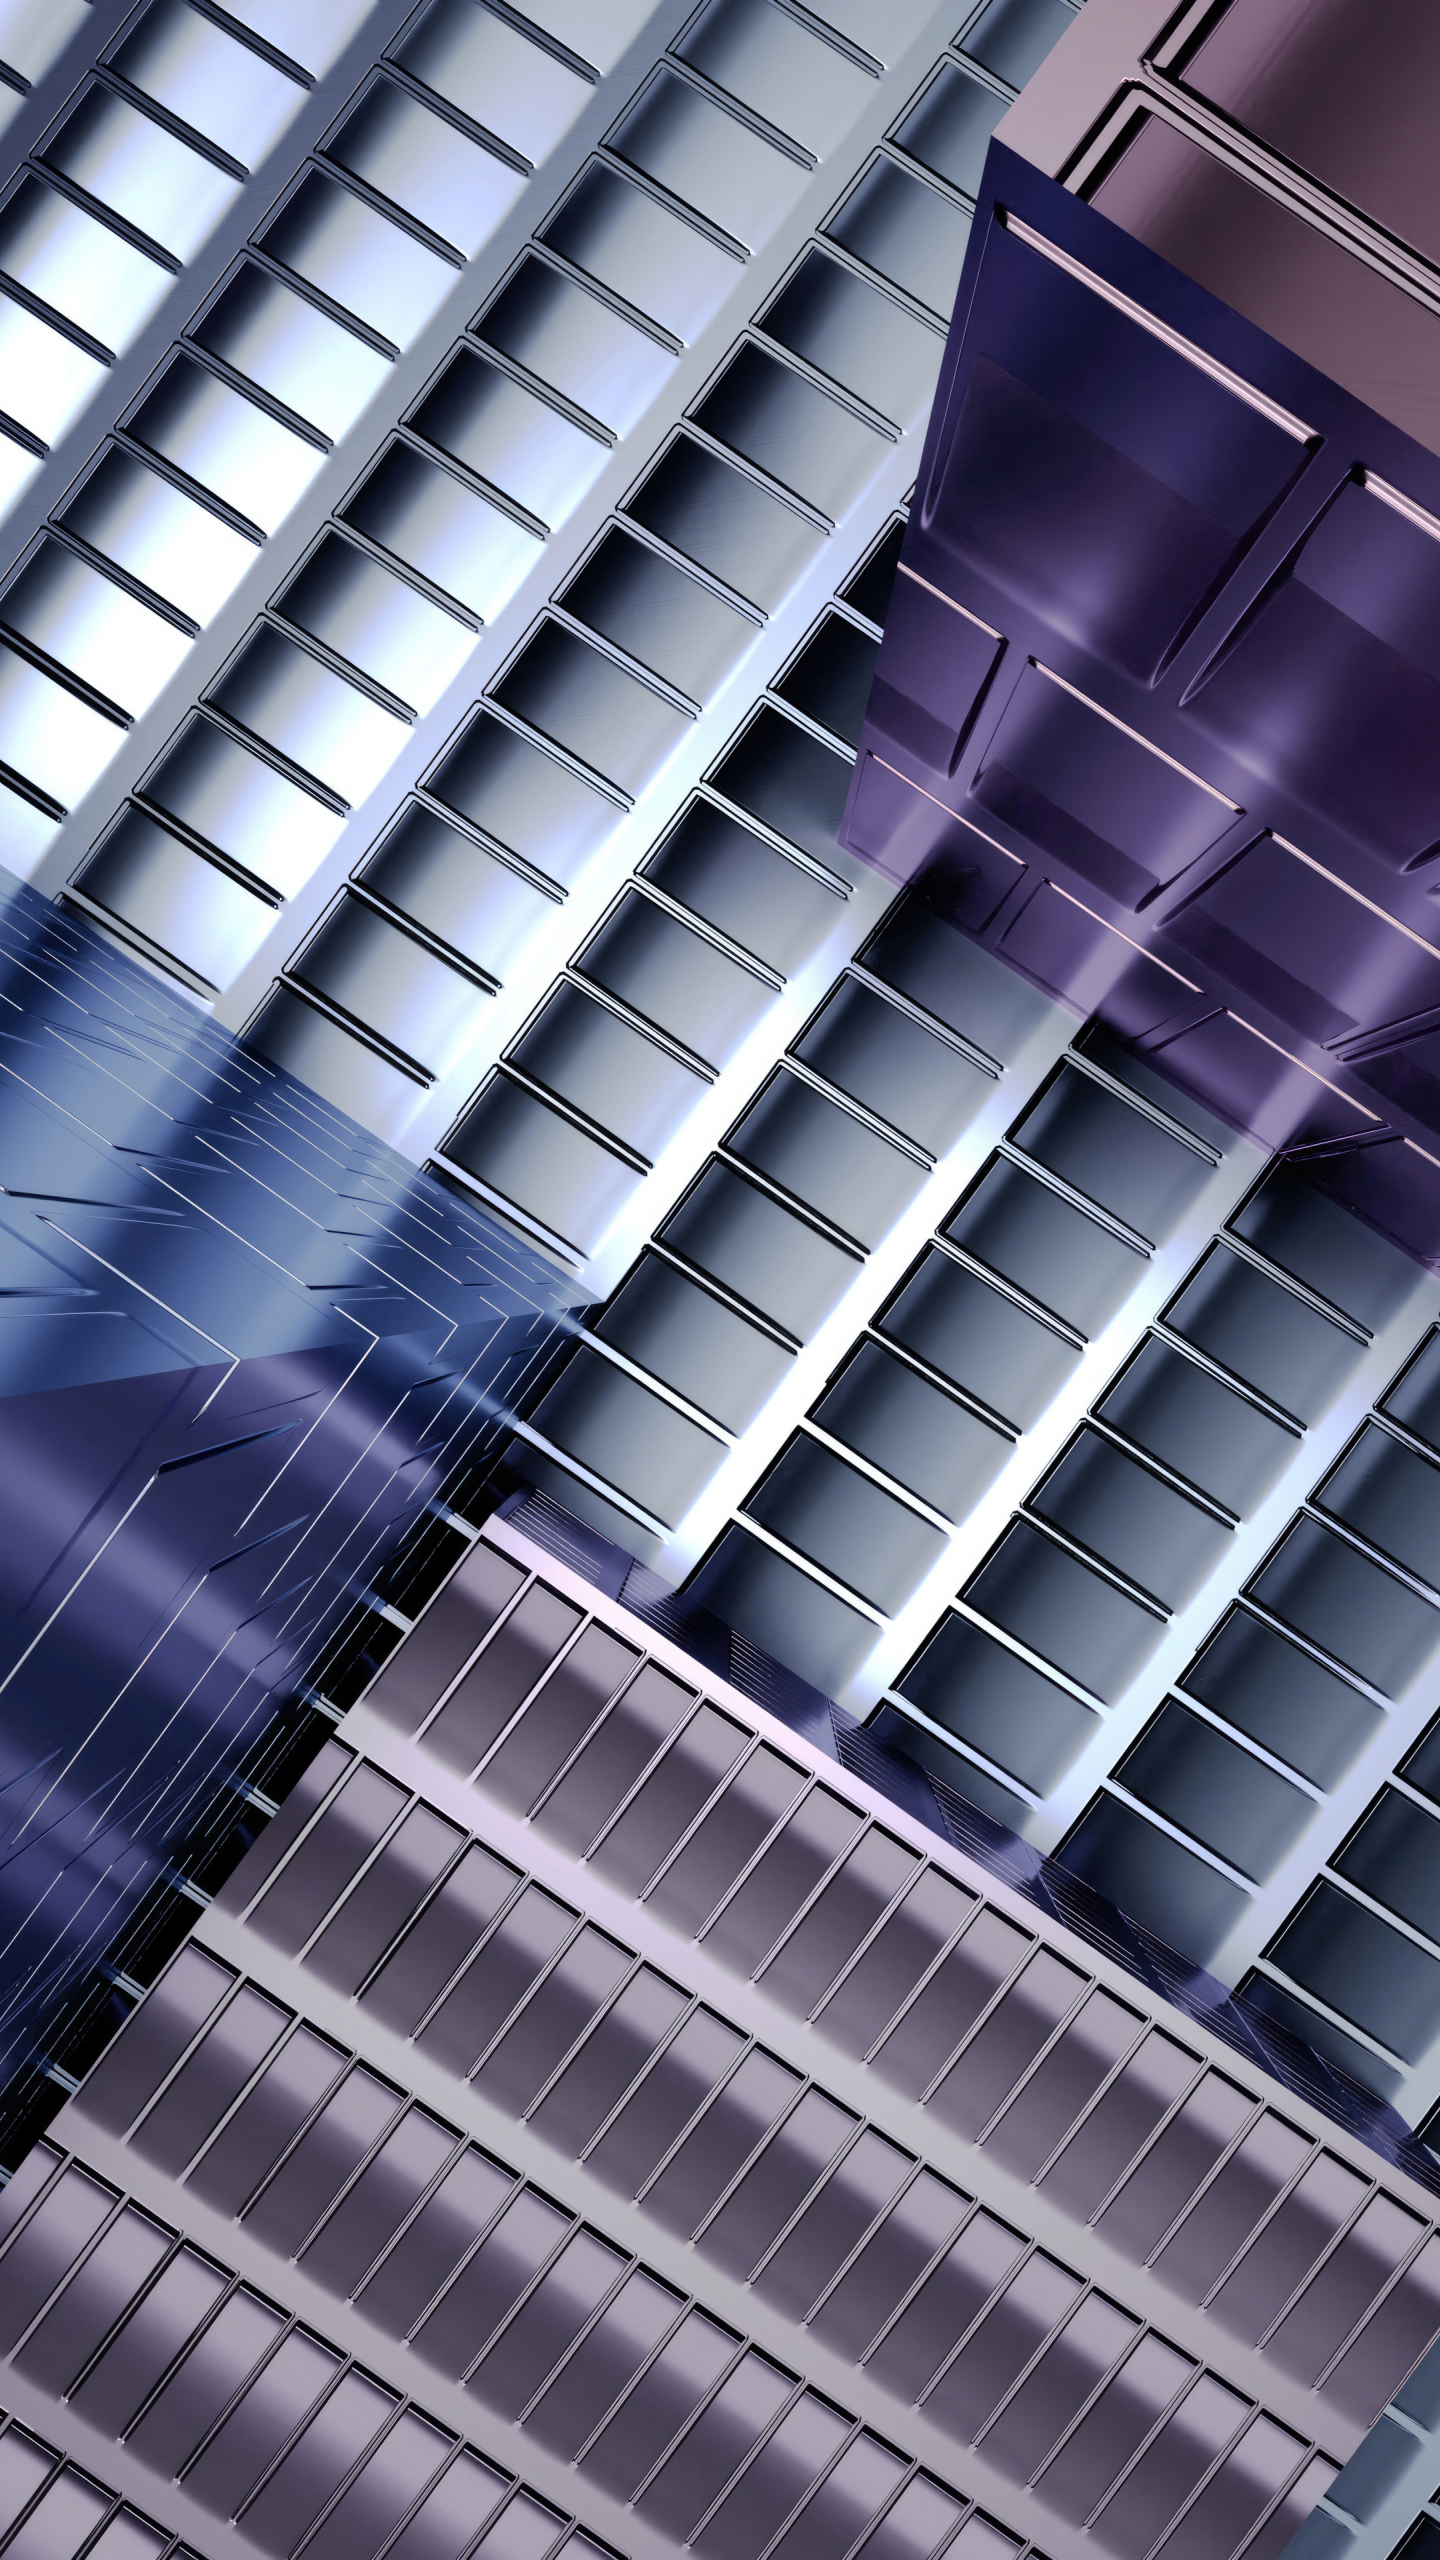 Metal grid structure, abstract, shine, 1440x2560 wallpaper